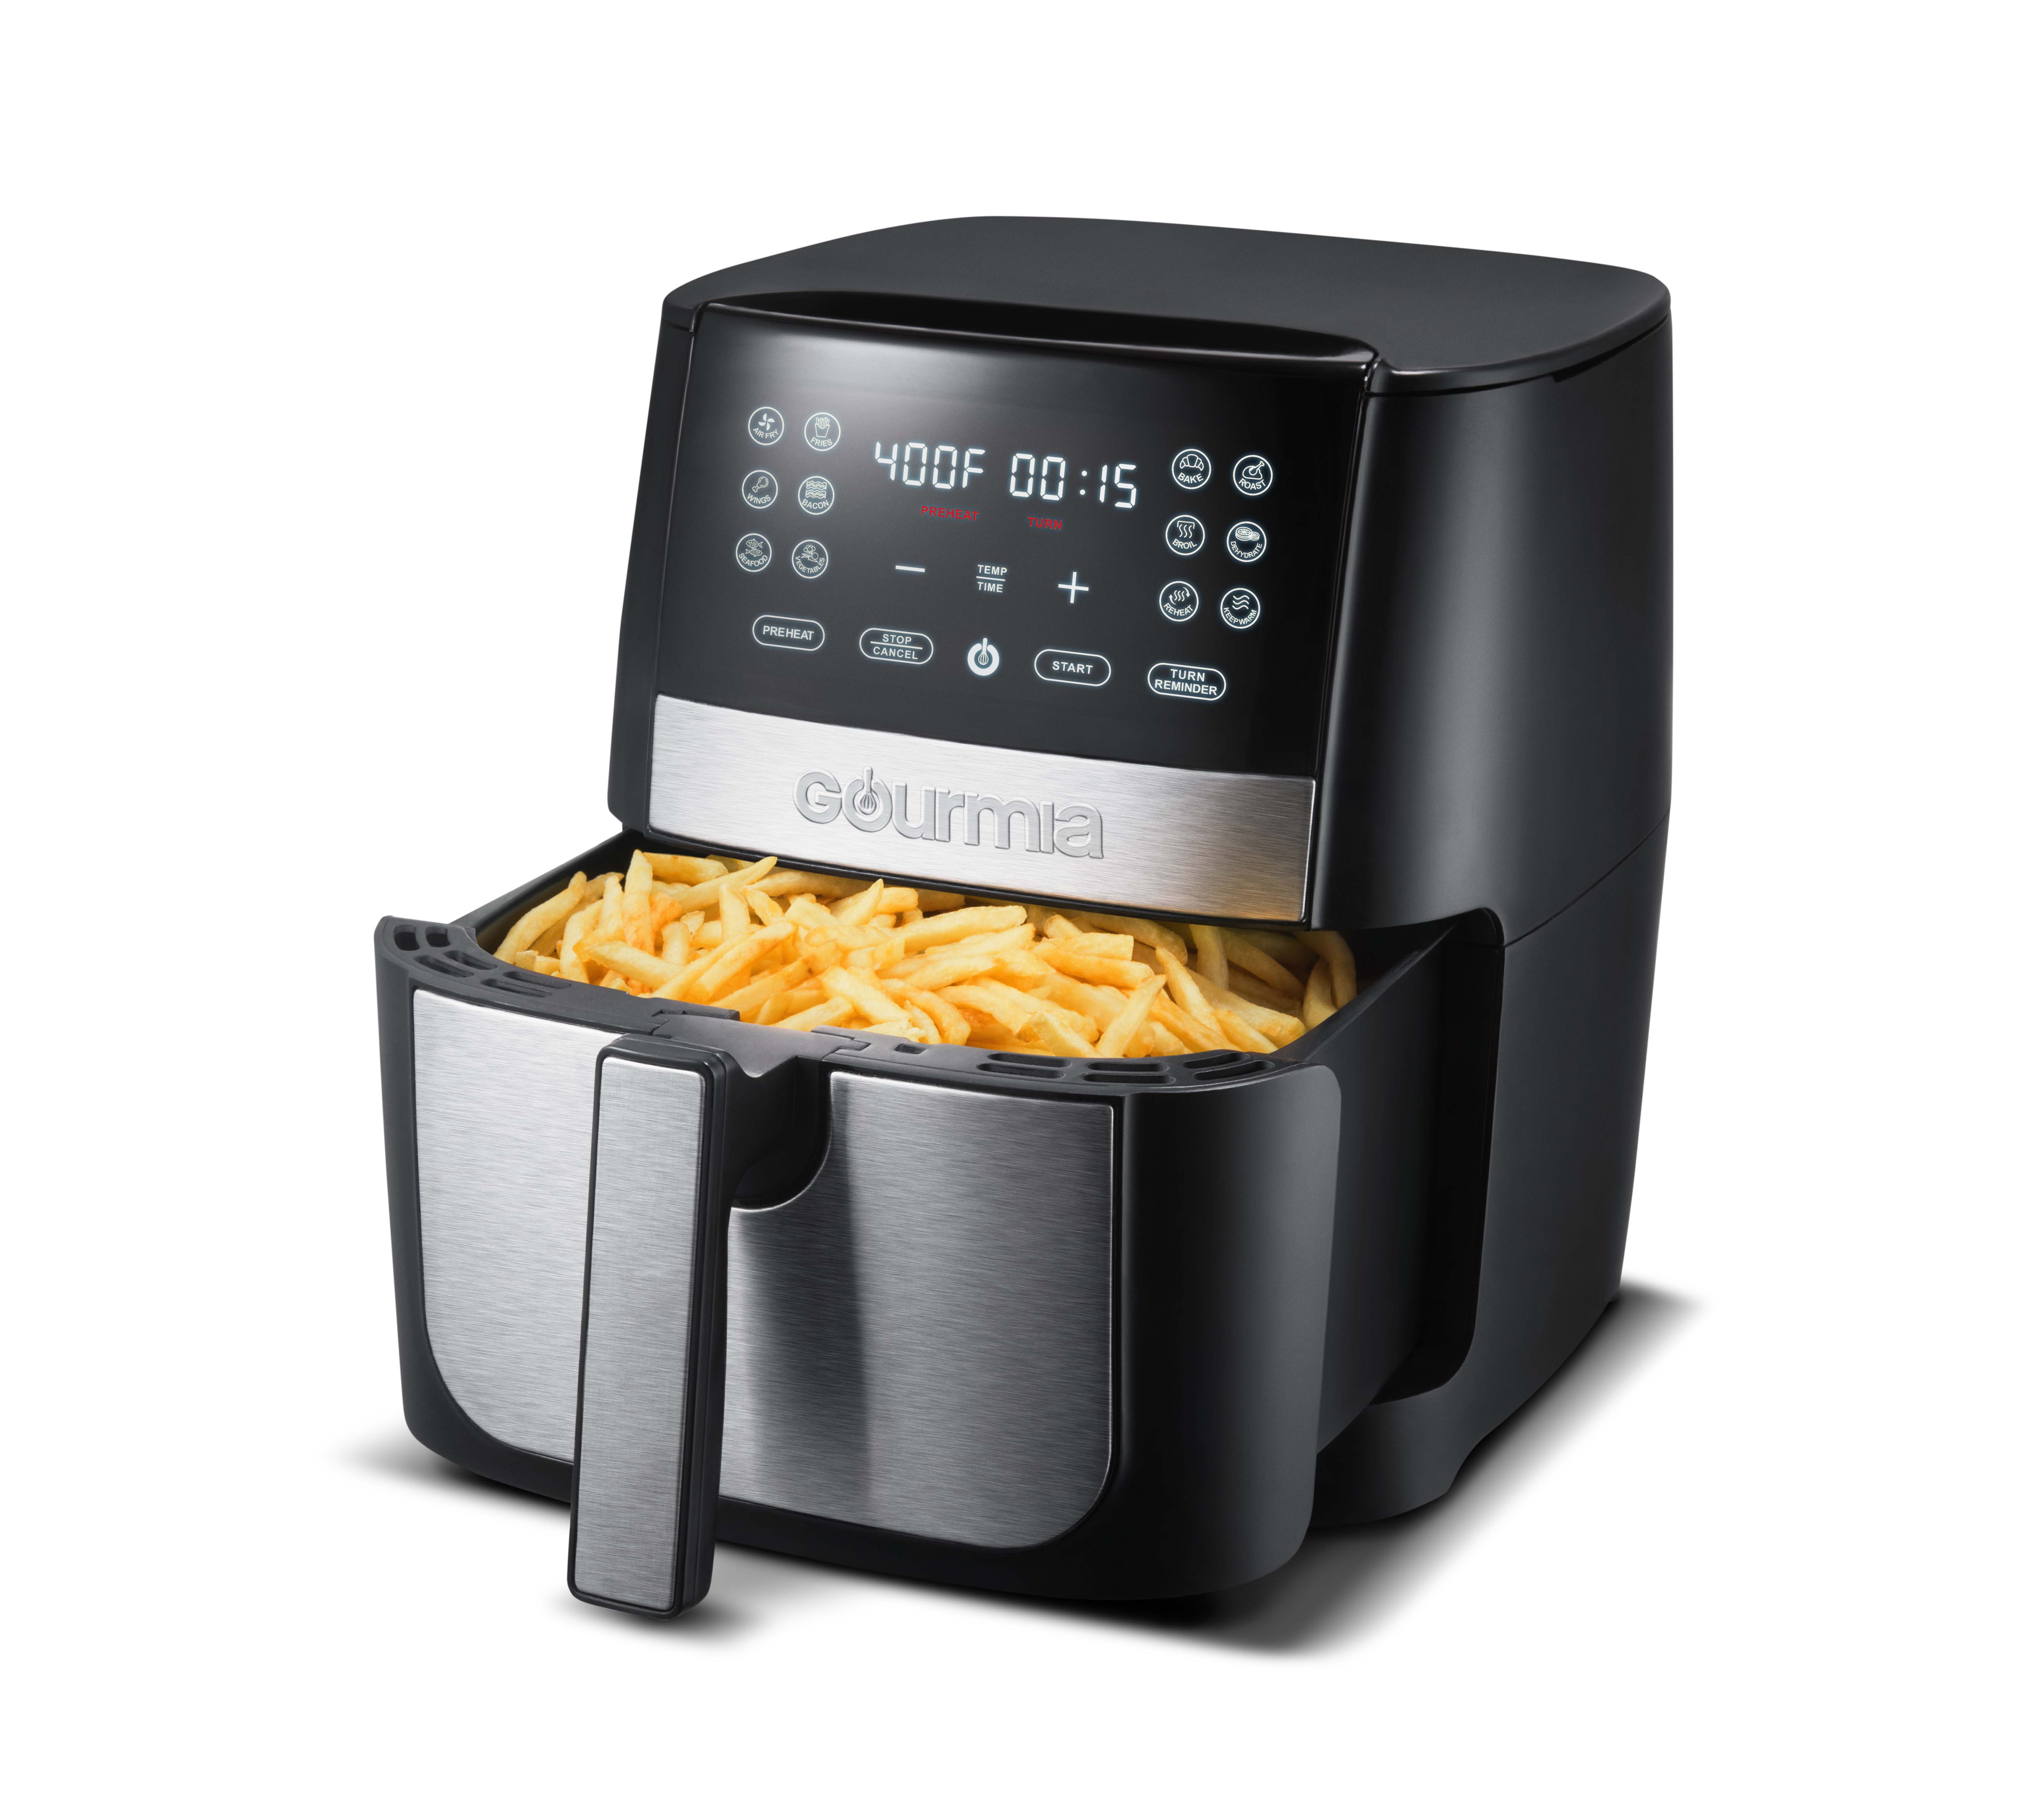 Gourmia 8 Qt Digital Air Fryer with FryForce 360 and Guided Cooking, Black/Stainless Steel, GAF826, 14.82 H, New - image 3 of 3